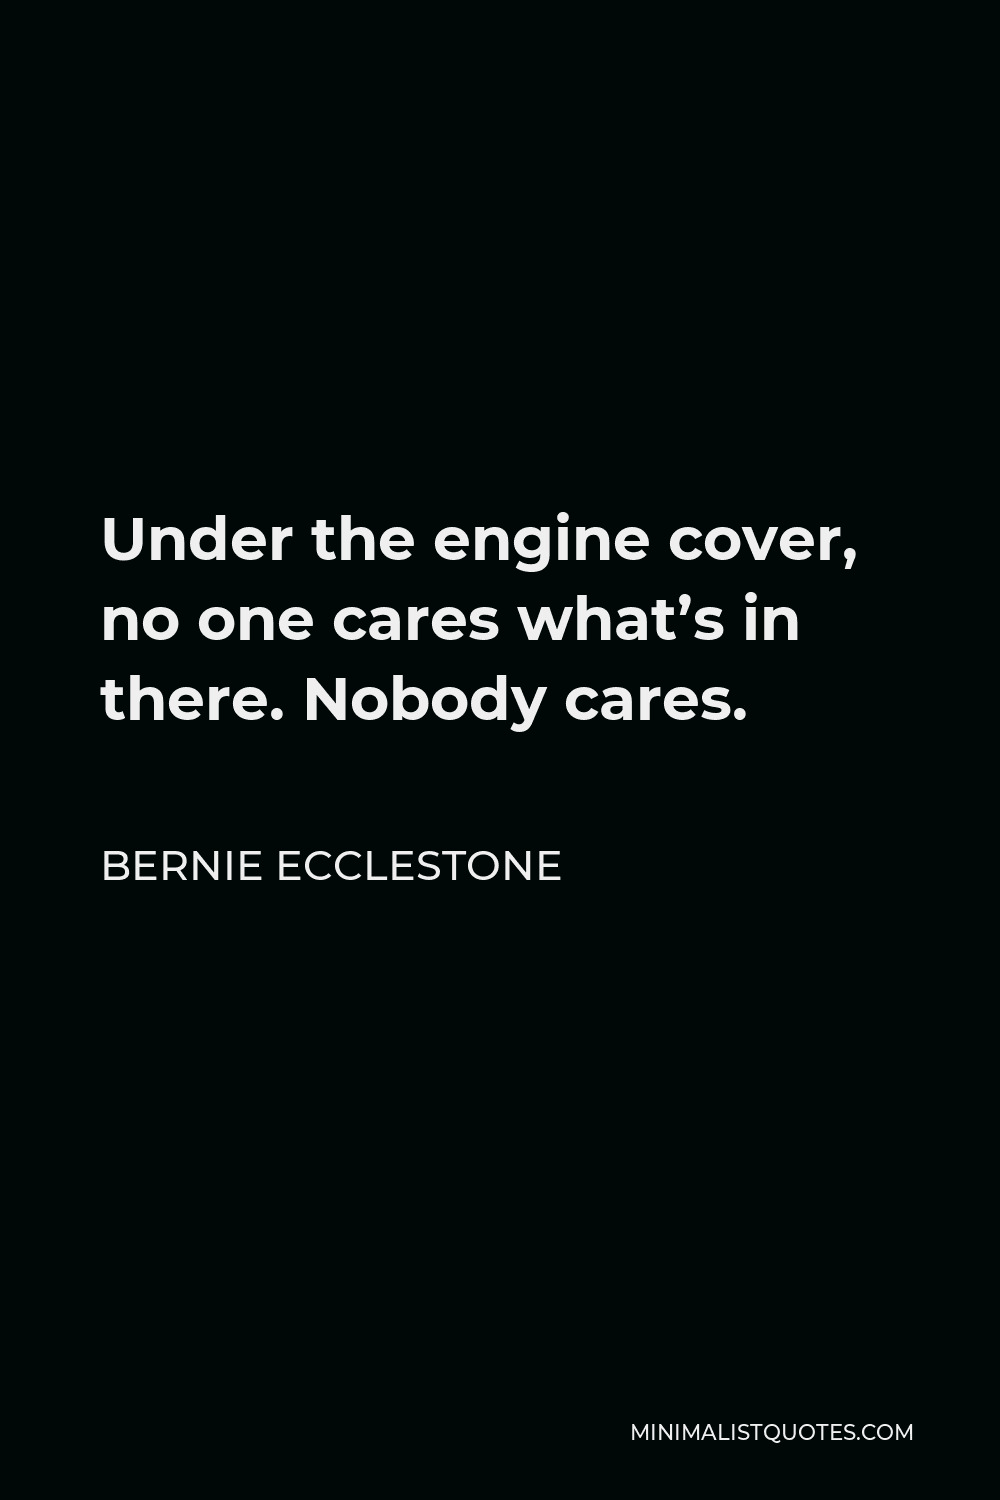 Bernie Ecclestone Quote - Under the engine cover, no one cares what’s in there. Nobody cares.